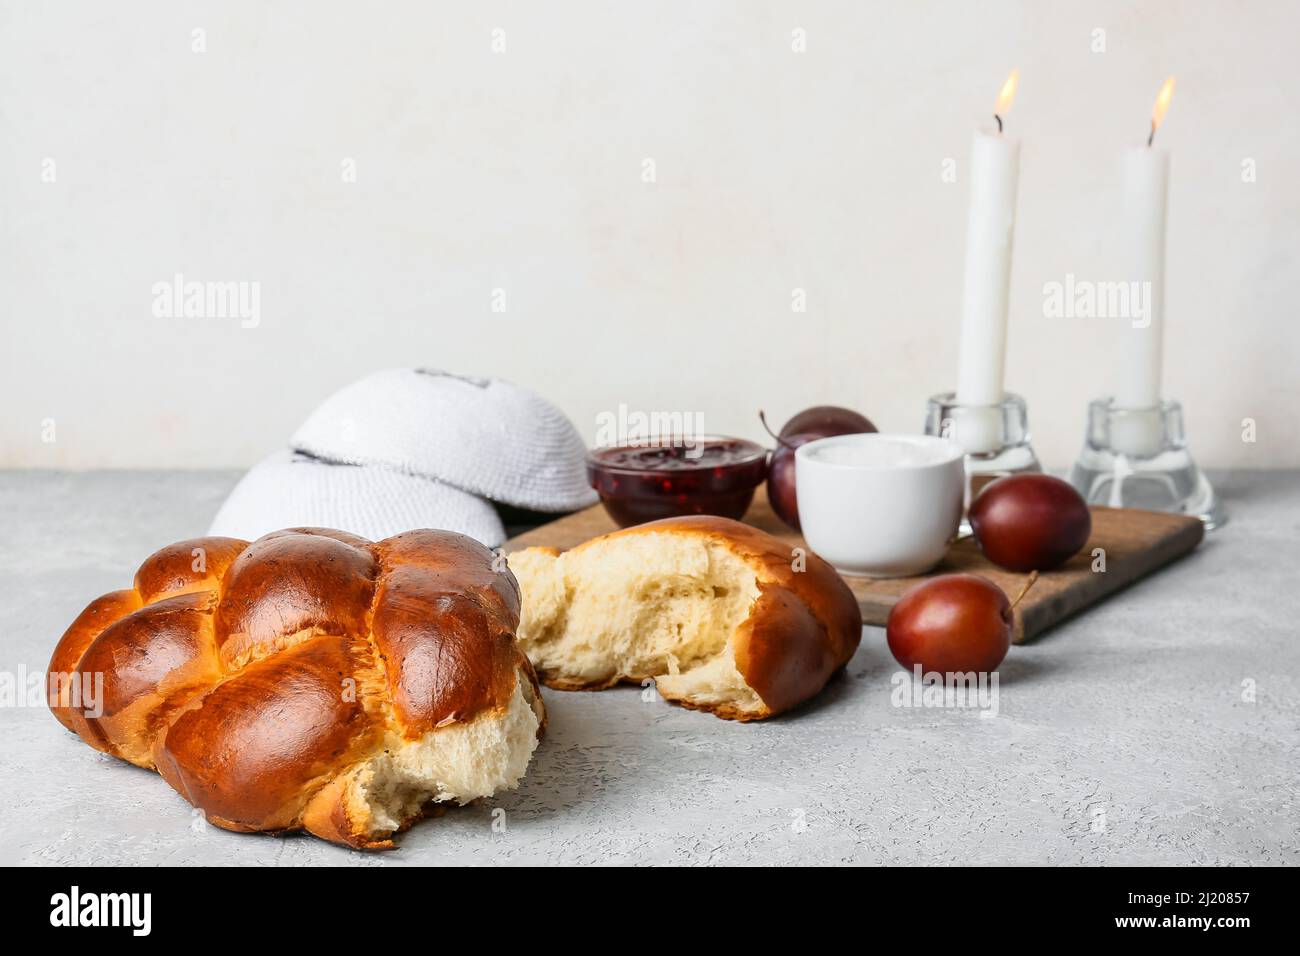 https://c8.alamy.com/comp/2J20857/traditional-challah-bread-with-glowing-candles-and-jewish-caps-on-light-background-shabbat-shalom-2J20857.jpg